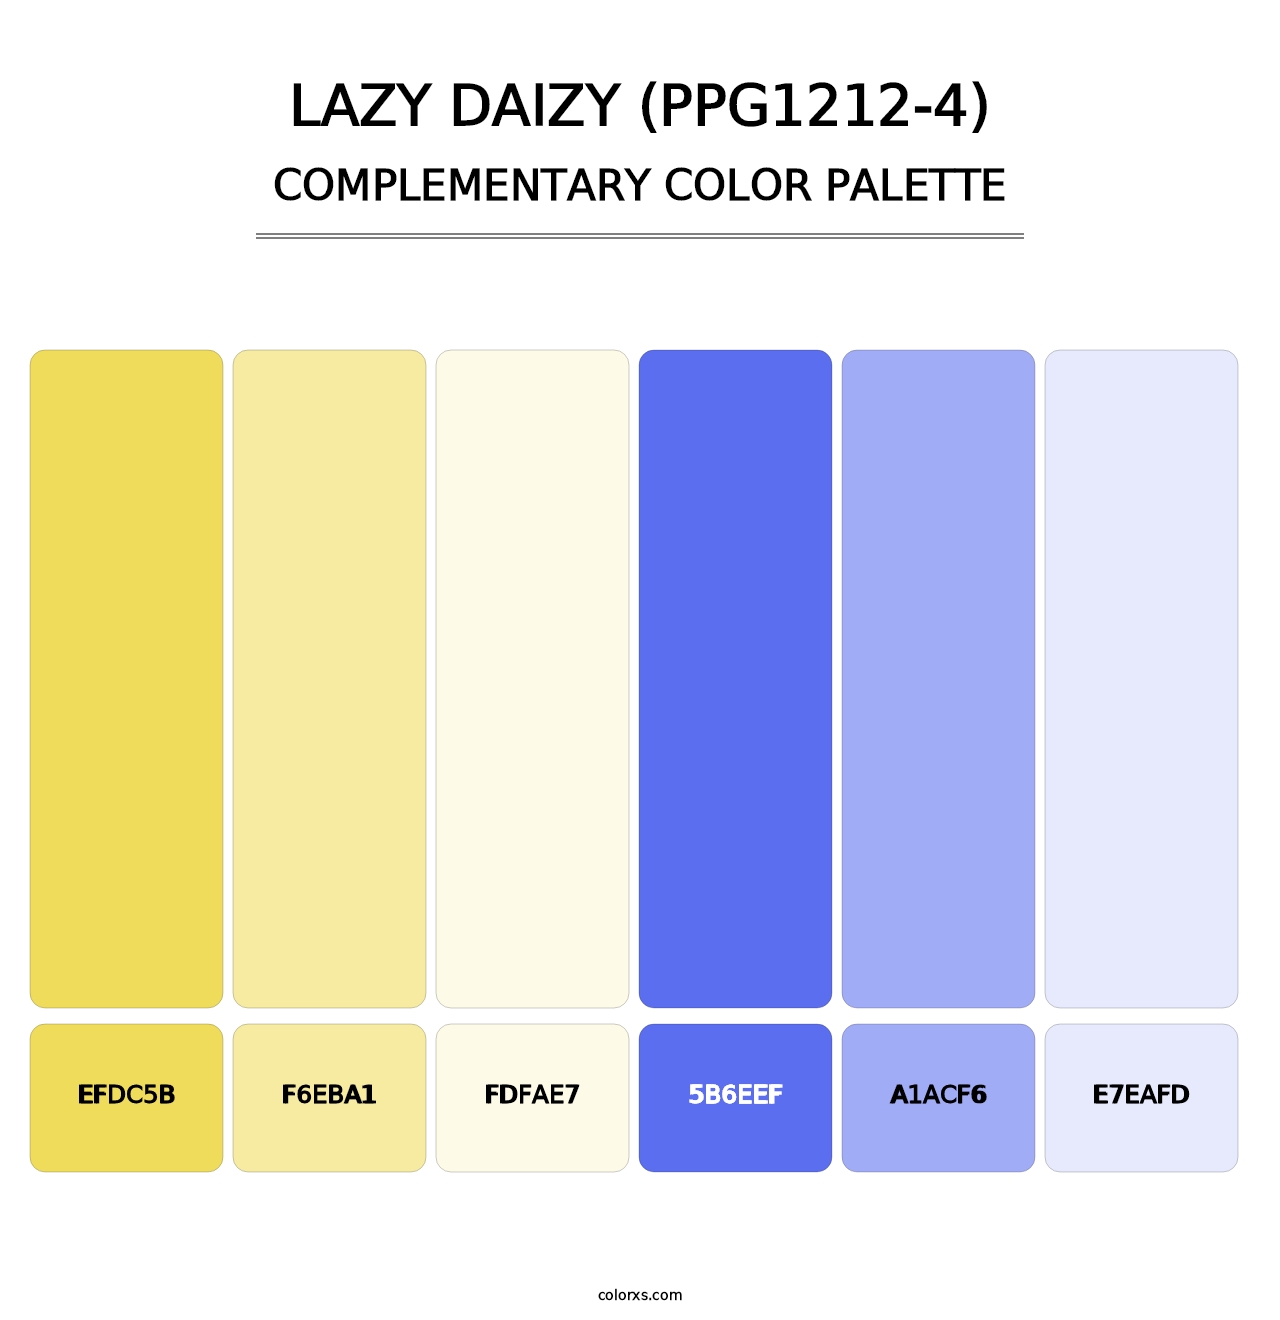 Lazy Daizy (PPG1212-4) - Complementary Color Palette